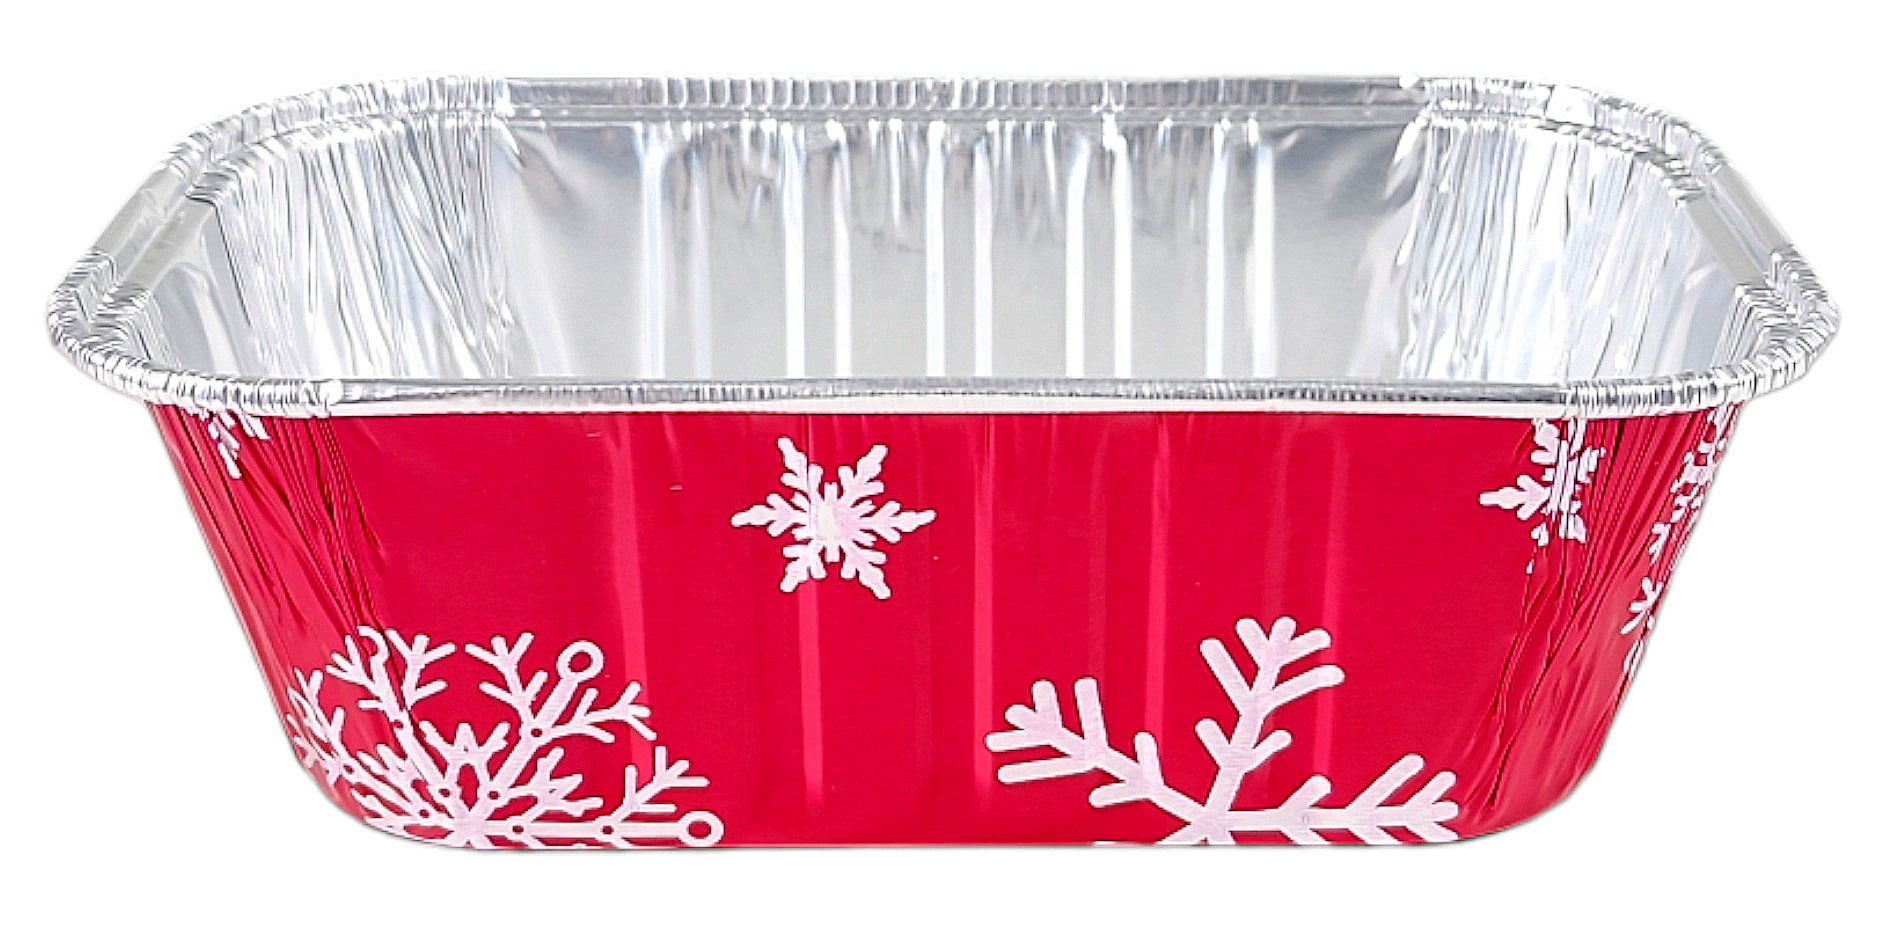 Pactogo 1 lb. Red Aluminum Foil Holiday Mini-Loaf Snowflake Pan